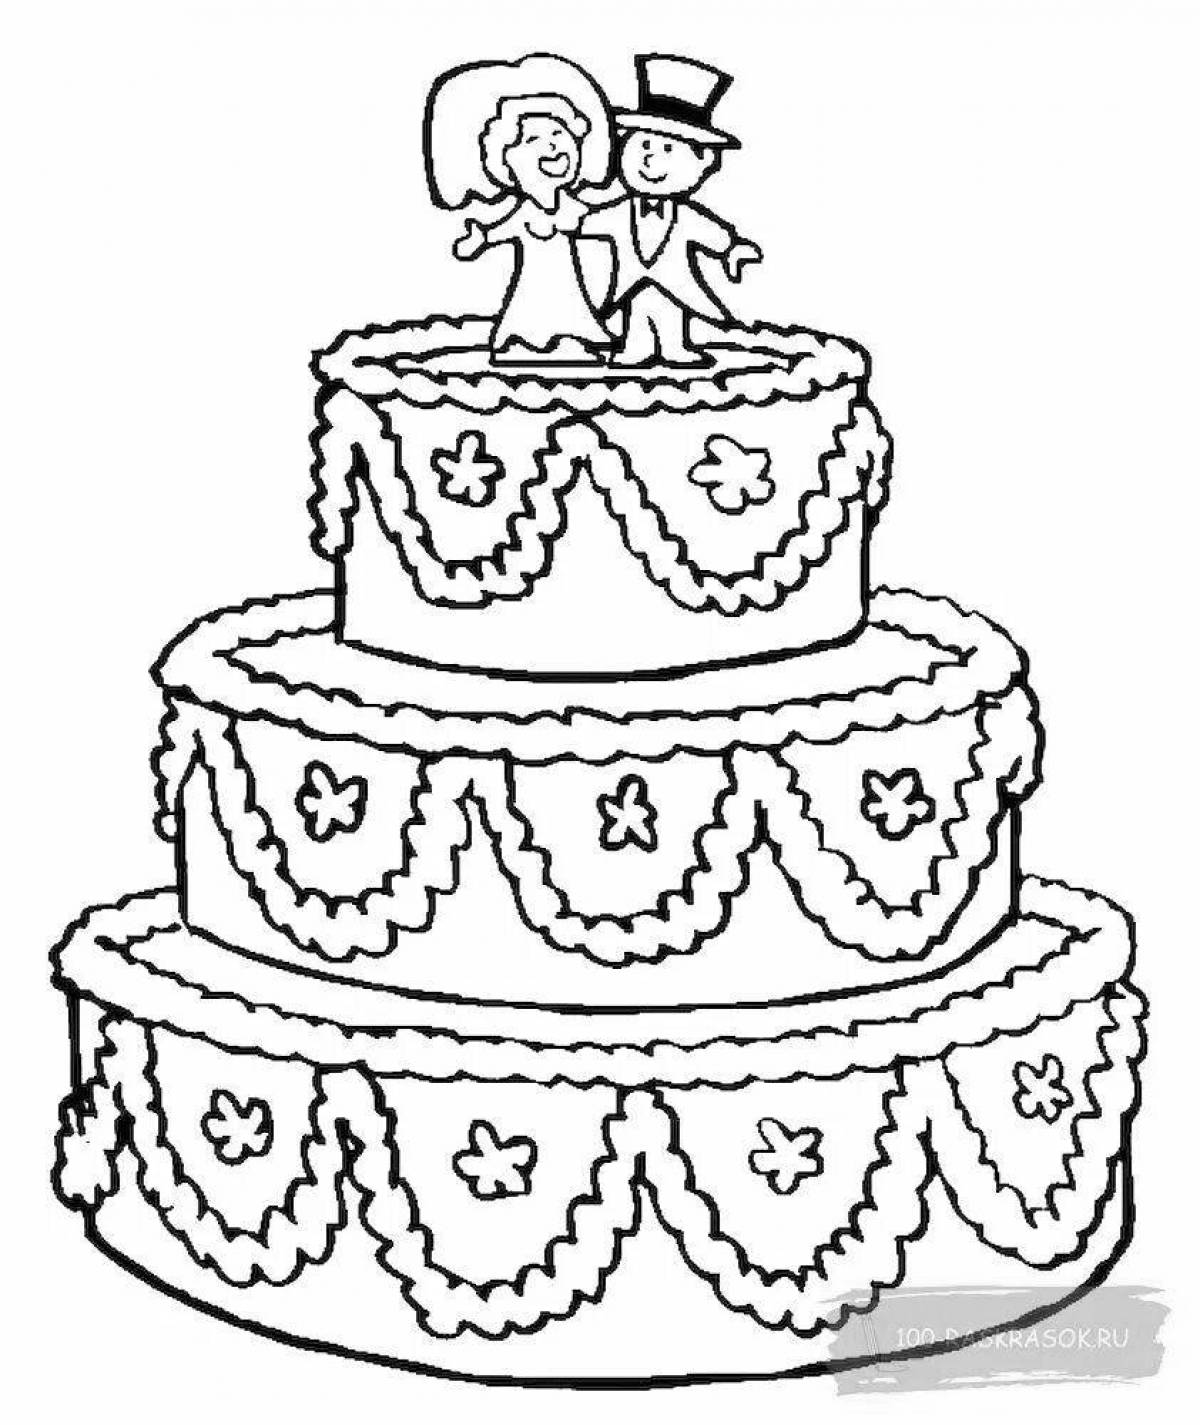 Joyful cake coloring pages for girls